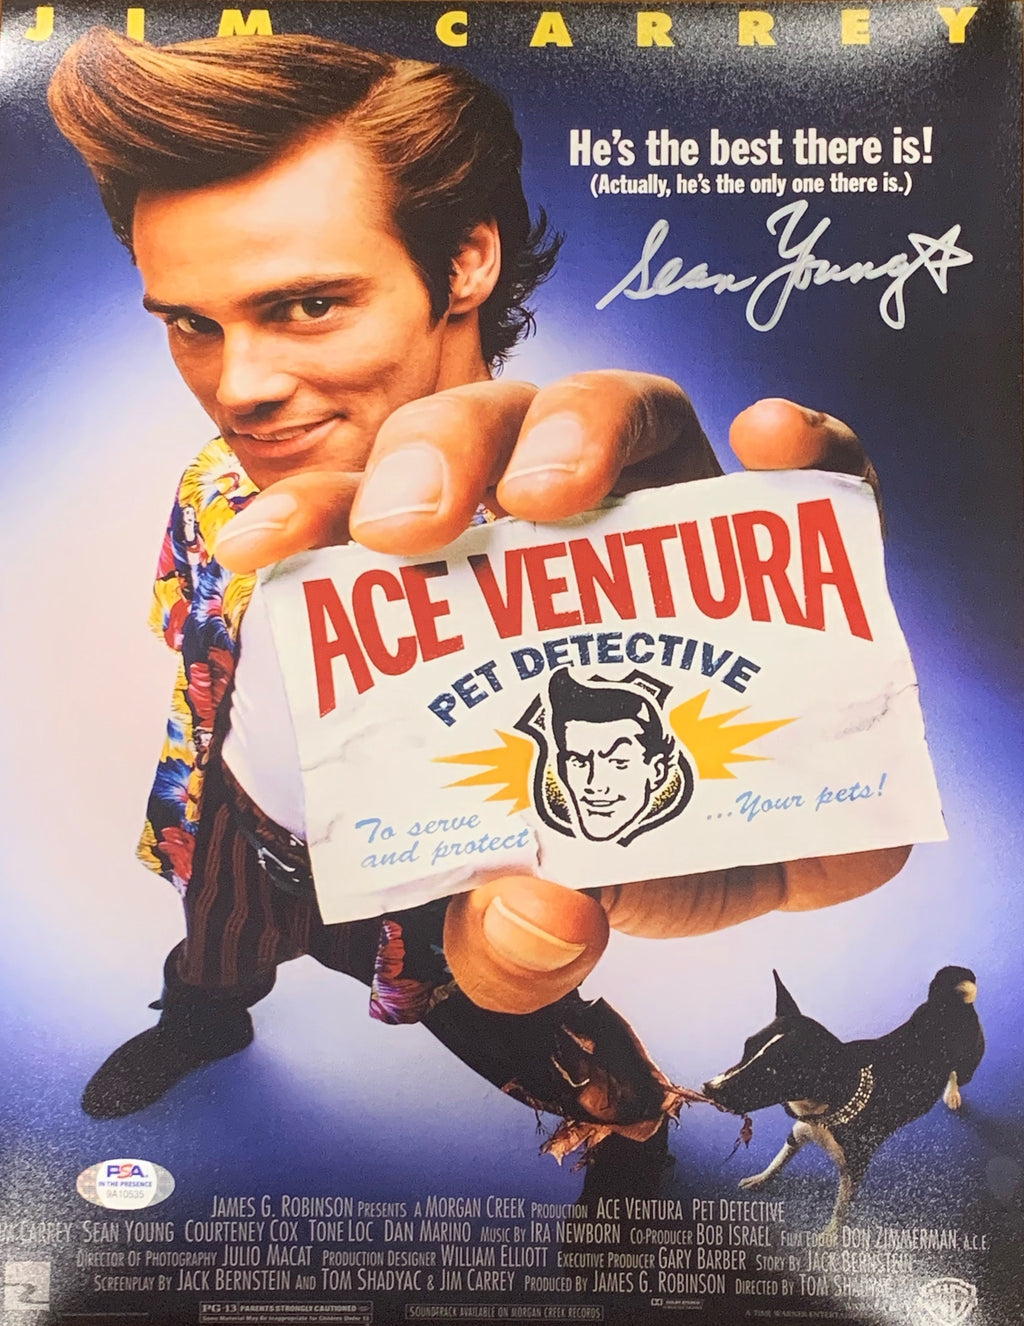 Sean Young autographed signed 11x14 photo Ace Ventura Ray Finkle PSA Witness - JAG Sports Marketing